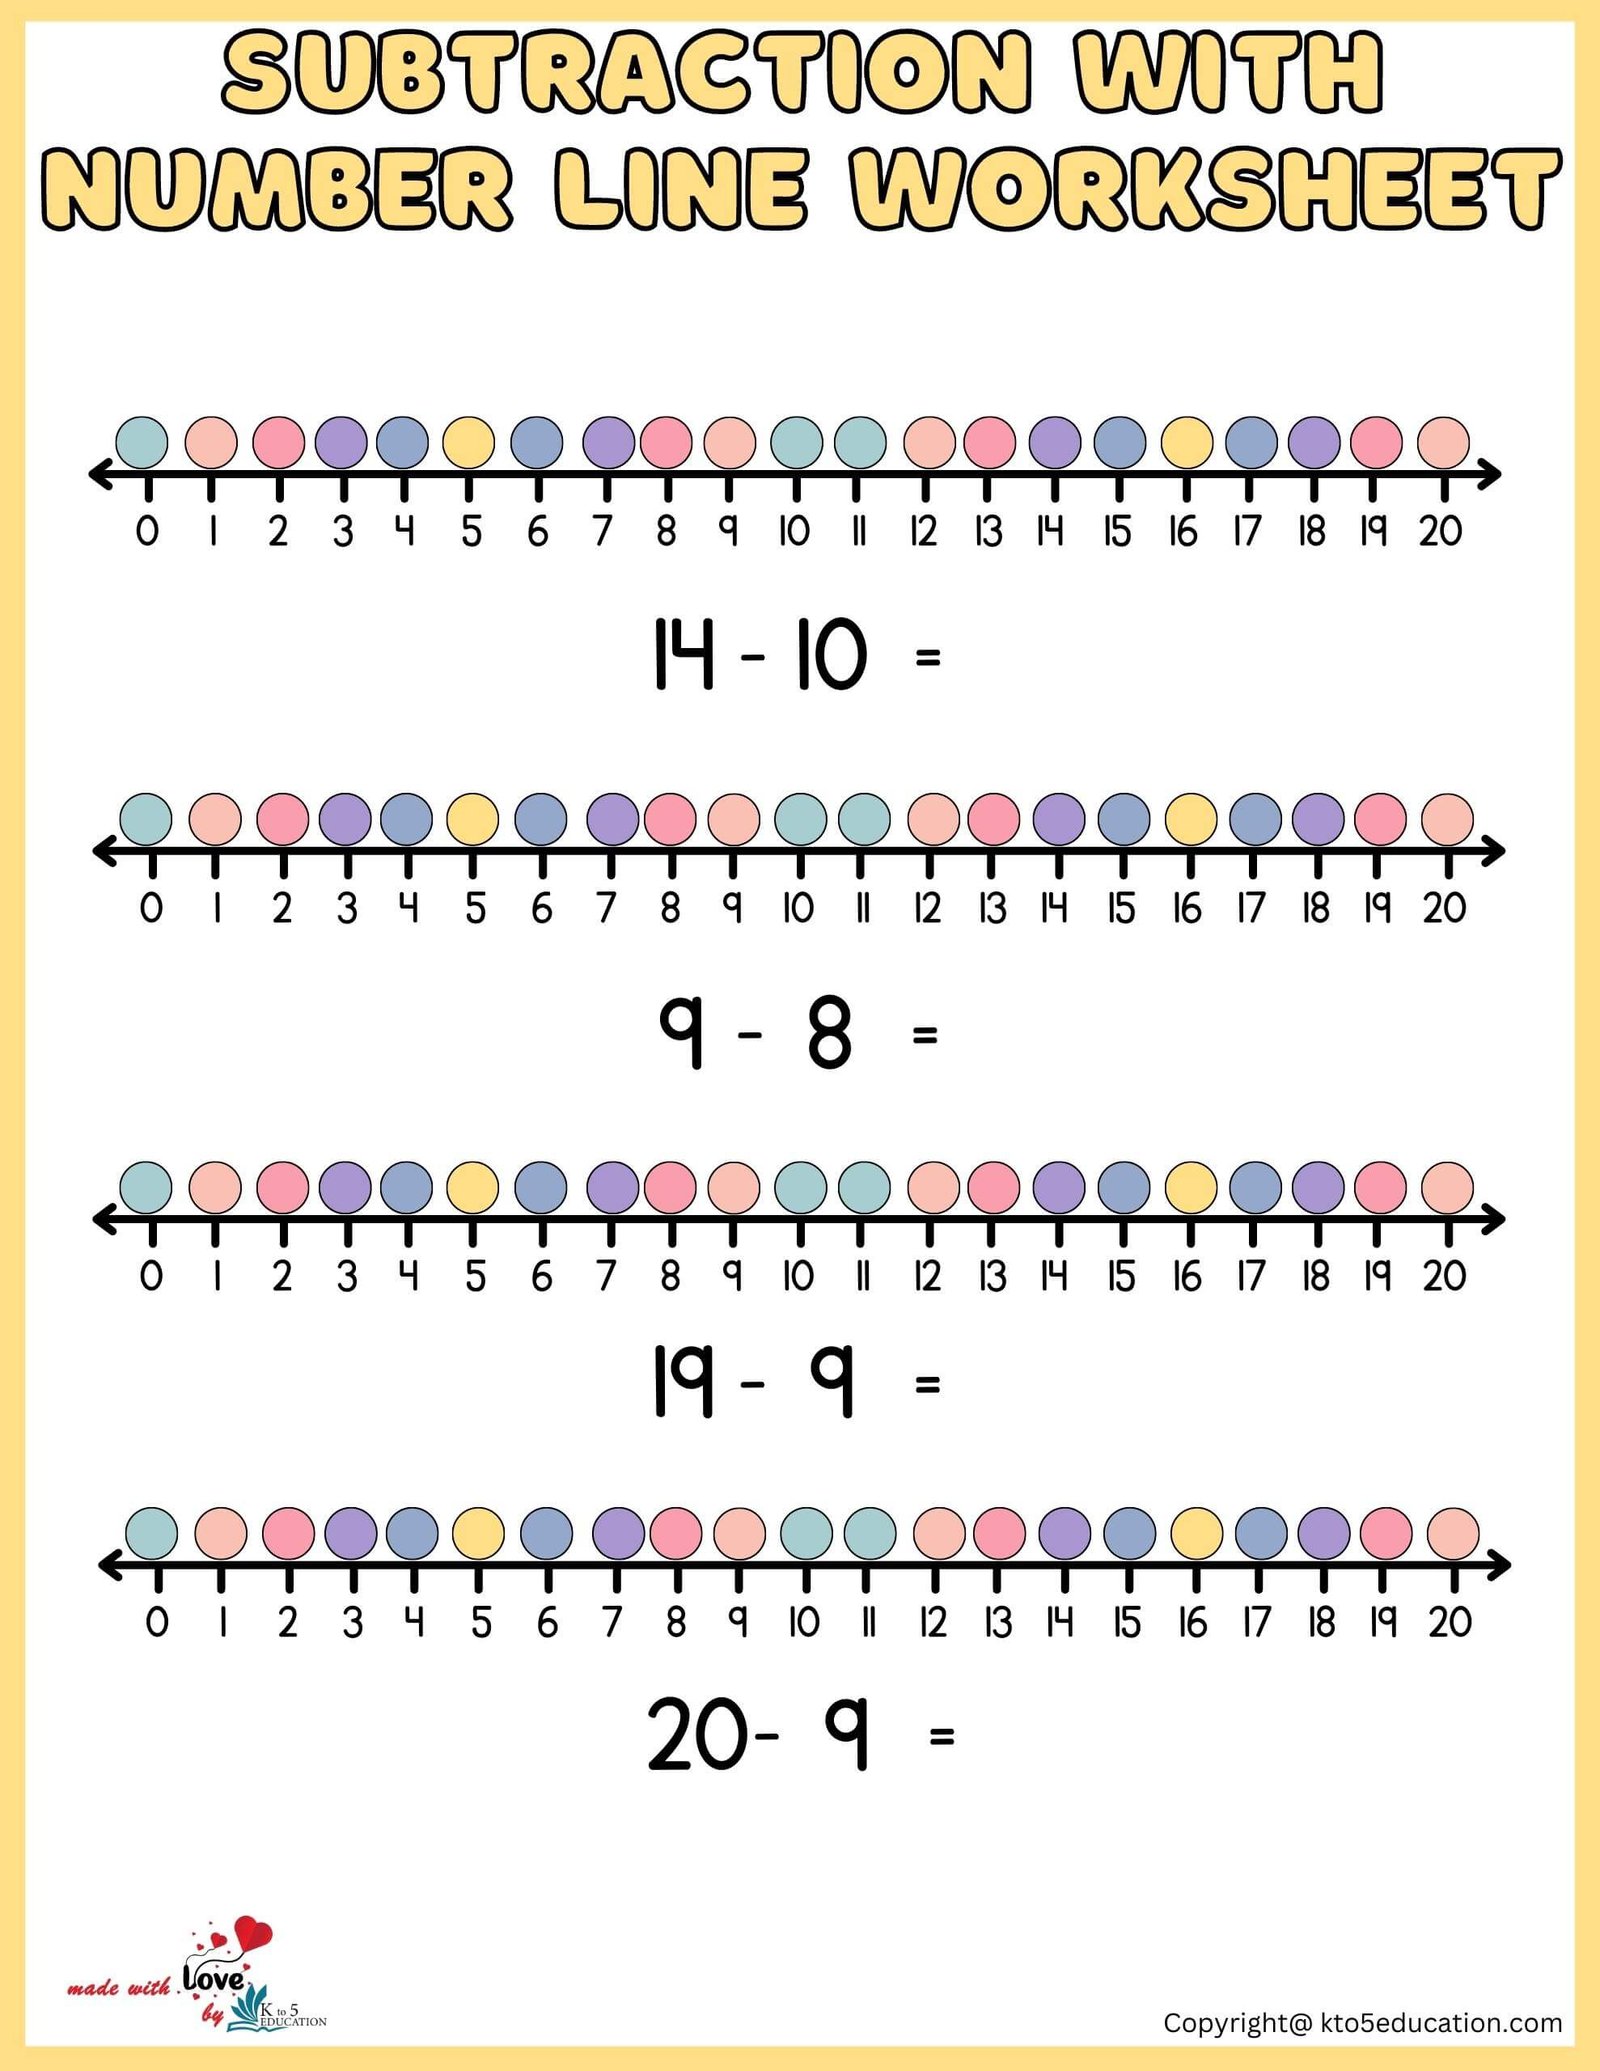 Subtraction With Number Line Printable Worksheet 1-20